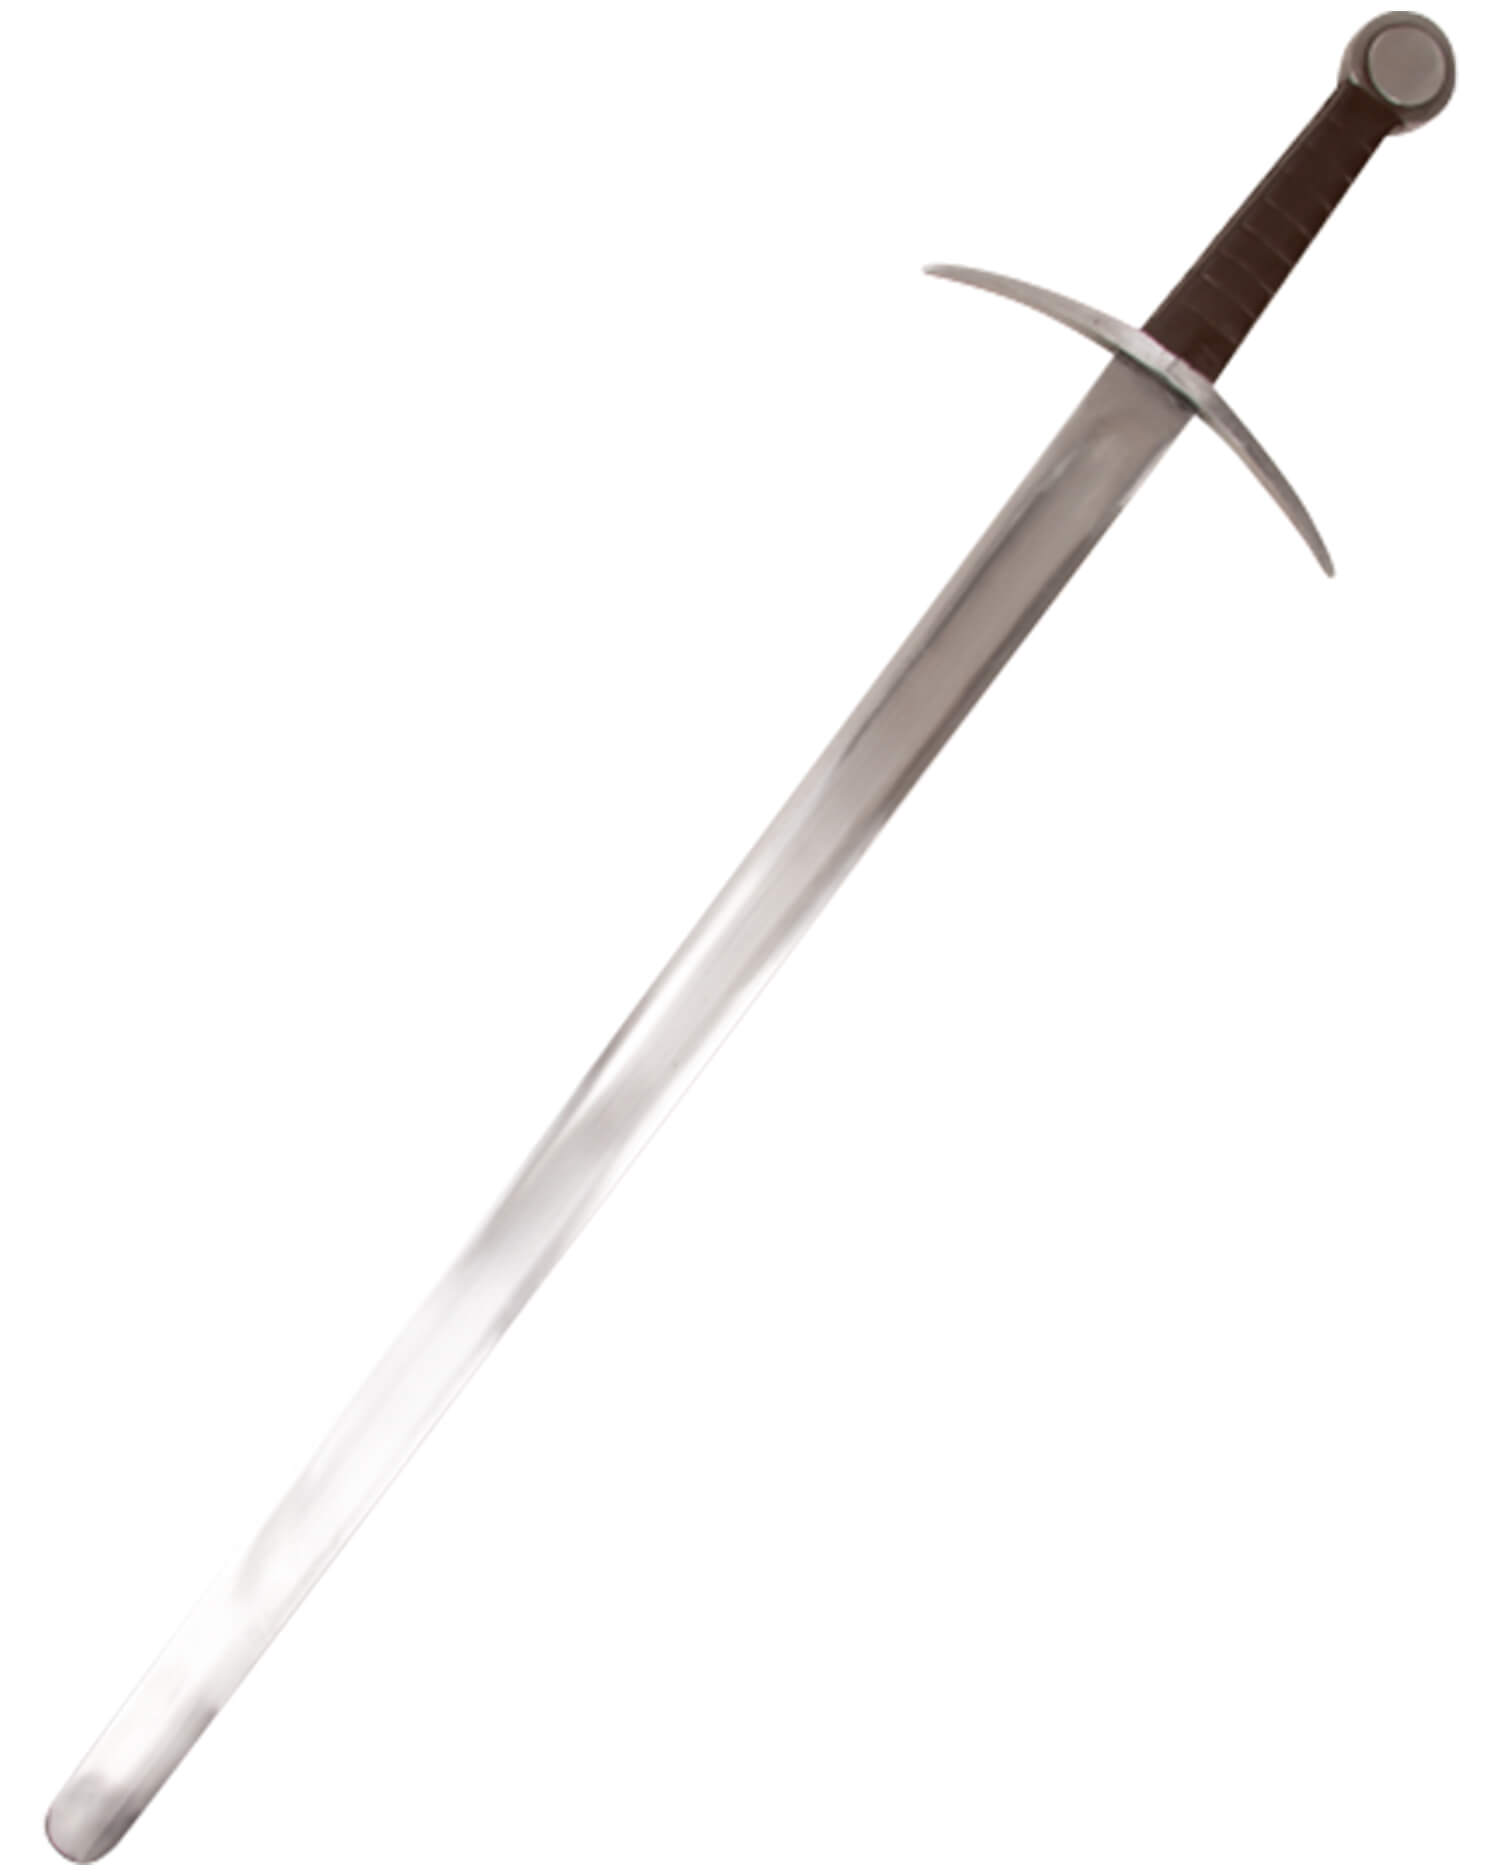 Arnold stage fight sword